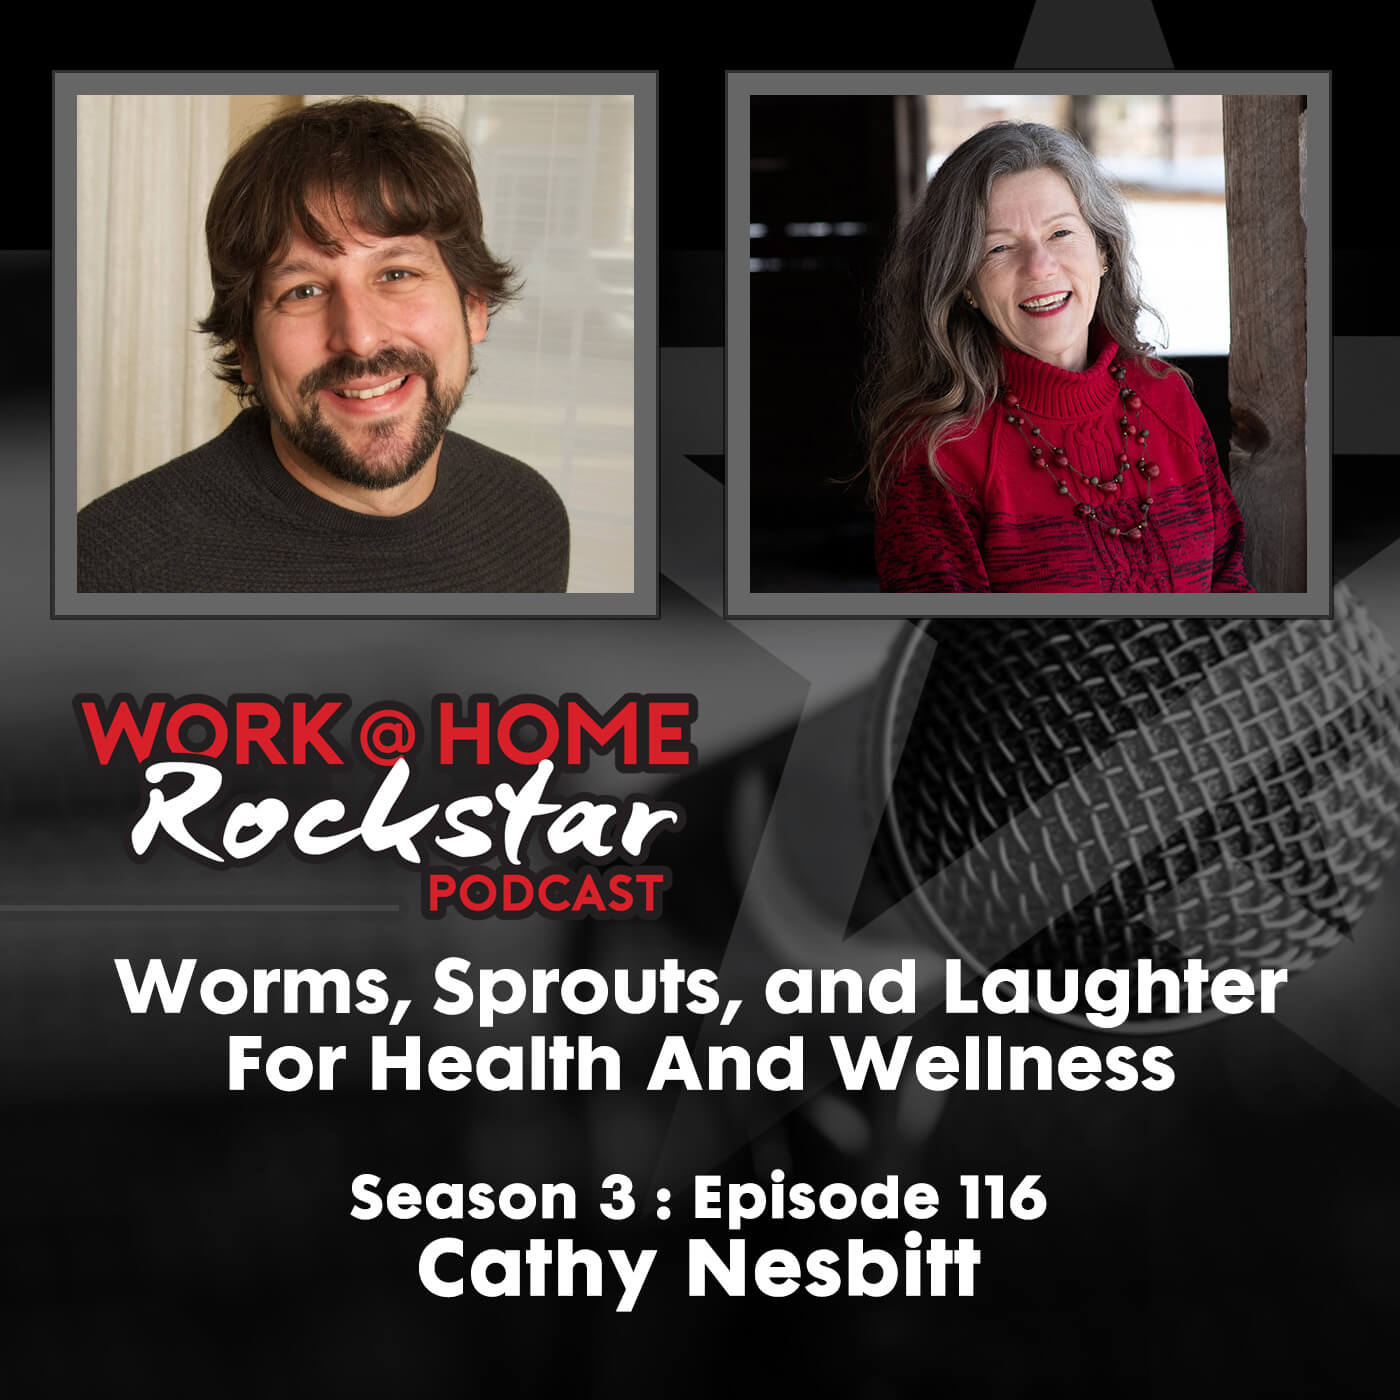 Worms, Sprouts, and Laughter For Health and Wellness with Cathy Nesbitt -  Work @ Home RockStar